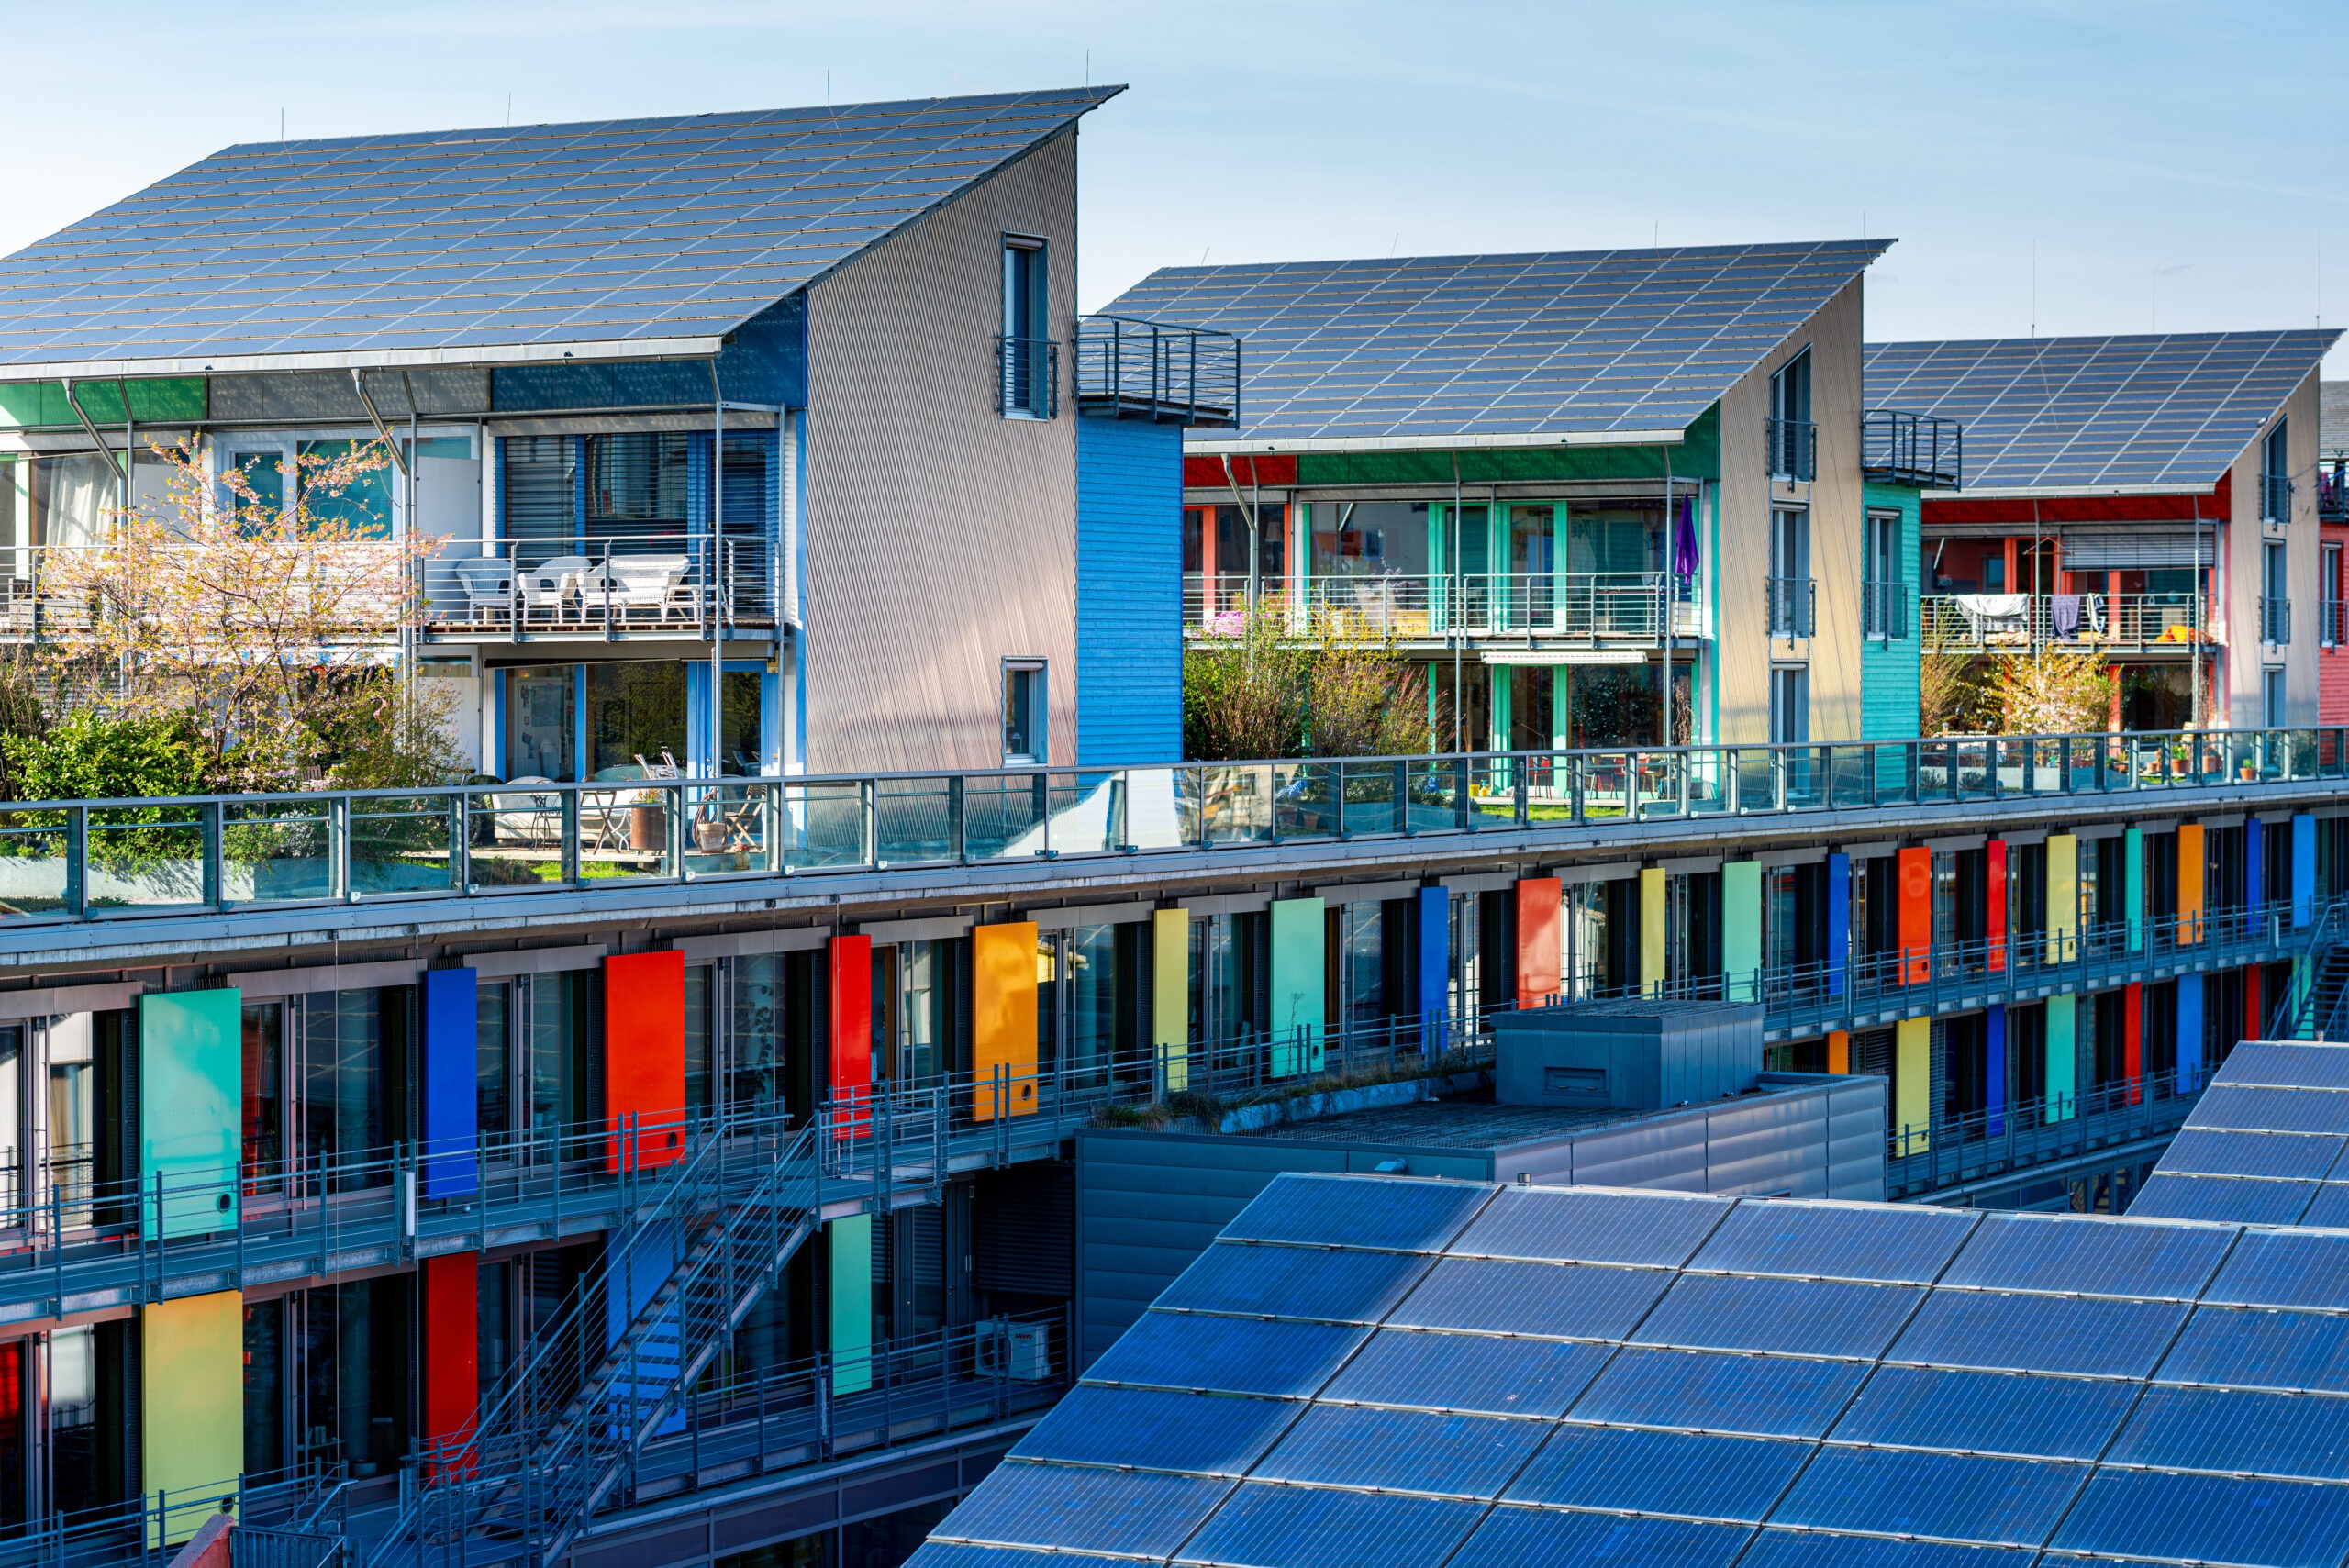 Vauban in Freiburg, Germany. uses renewable energy - an example of decarbonising real estate